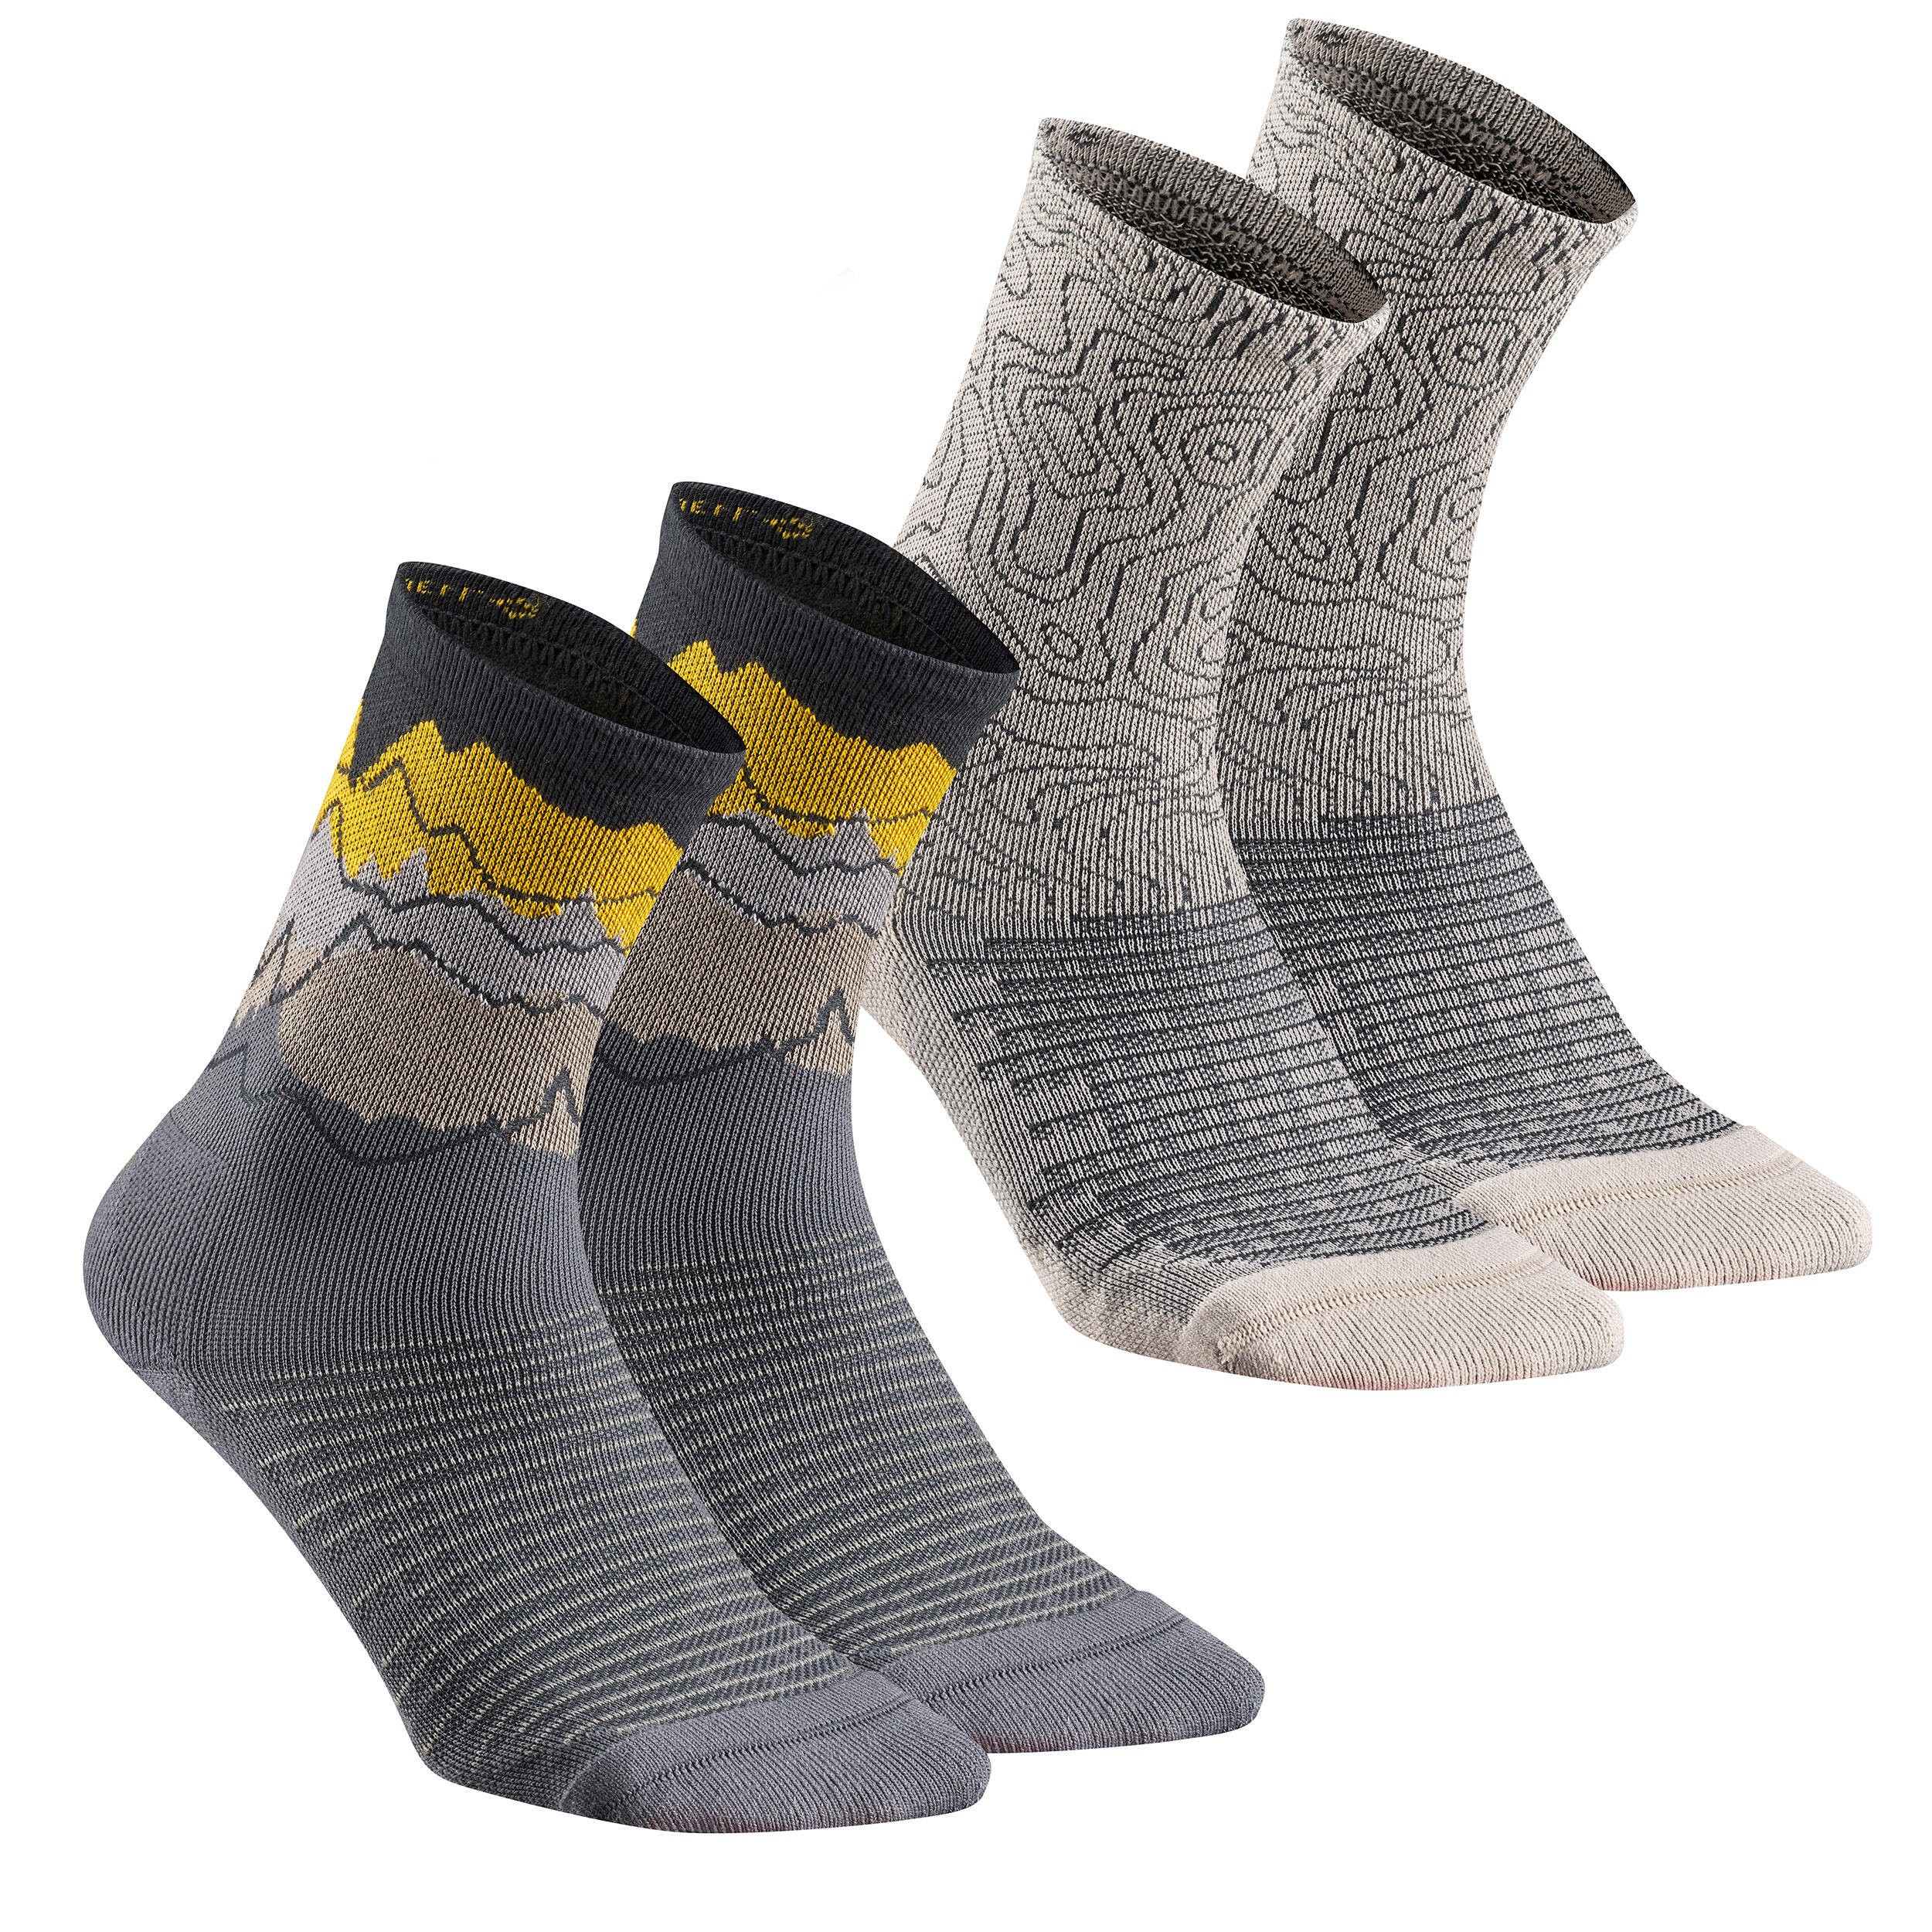 QUECHUA Sock Hike 100 High  - Limited Edition Pack of 2 Pairs - Grey